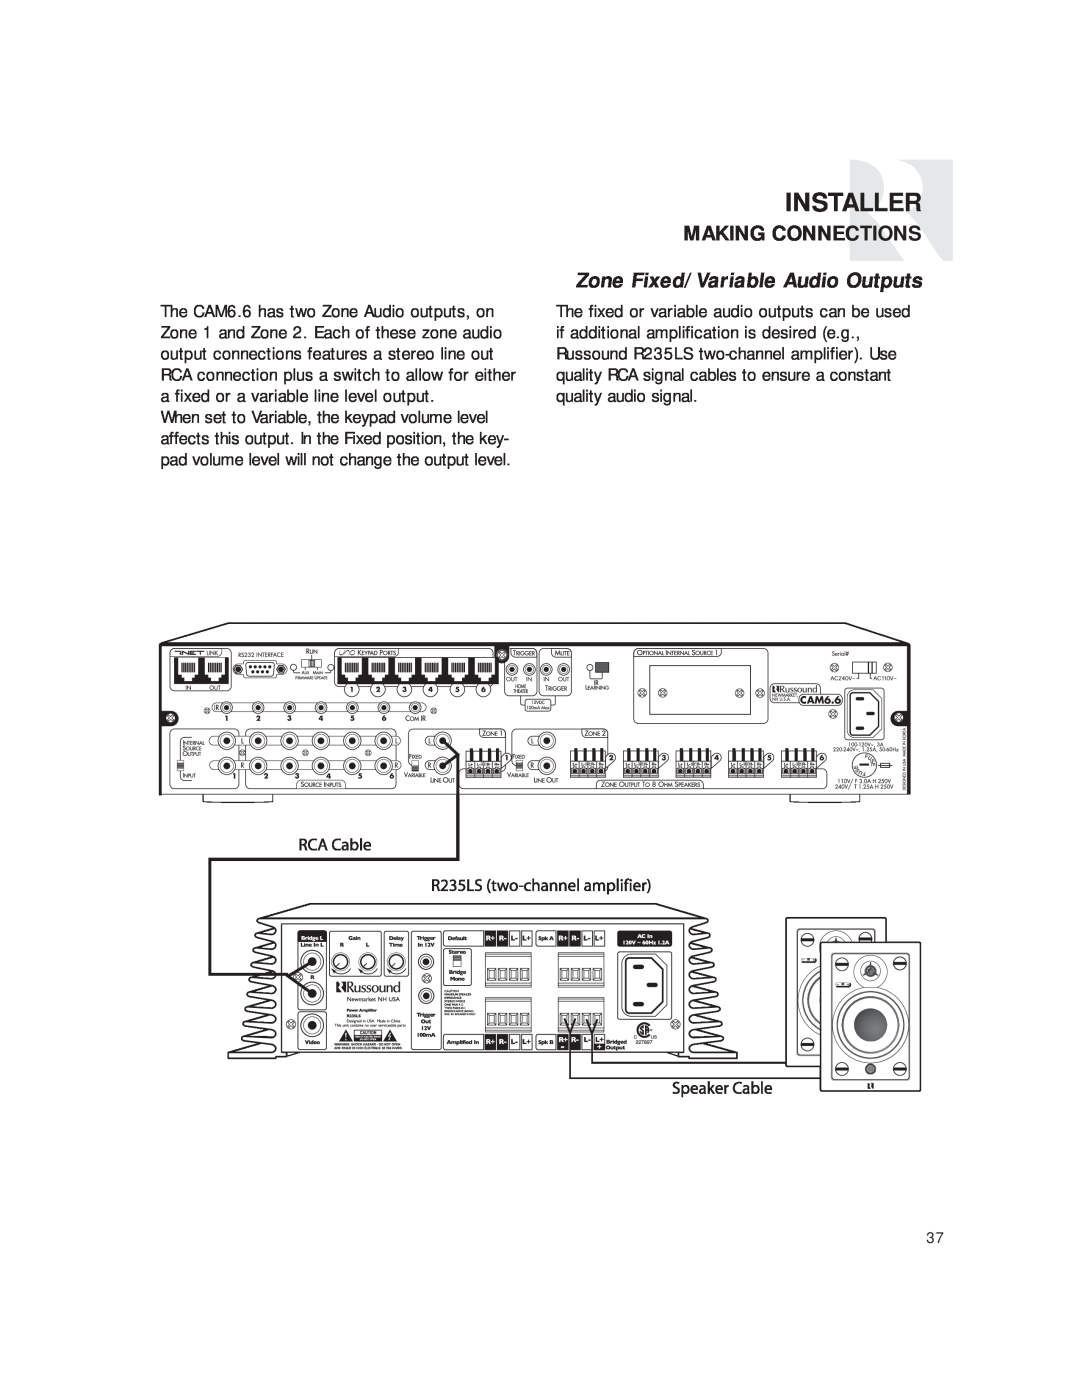 Russound CAM6.6T instruction manual Zone Fixed/Variable Audio Outputs, Installer, Making Connections 